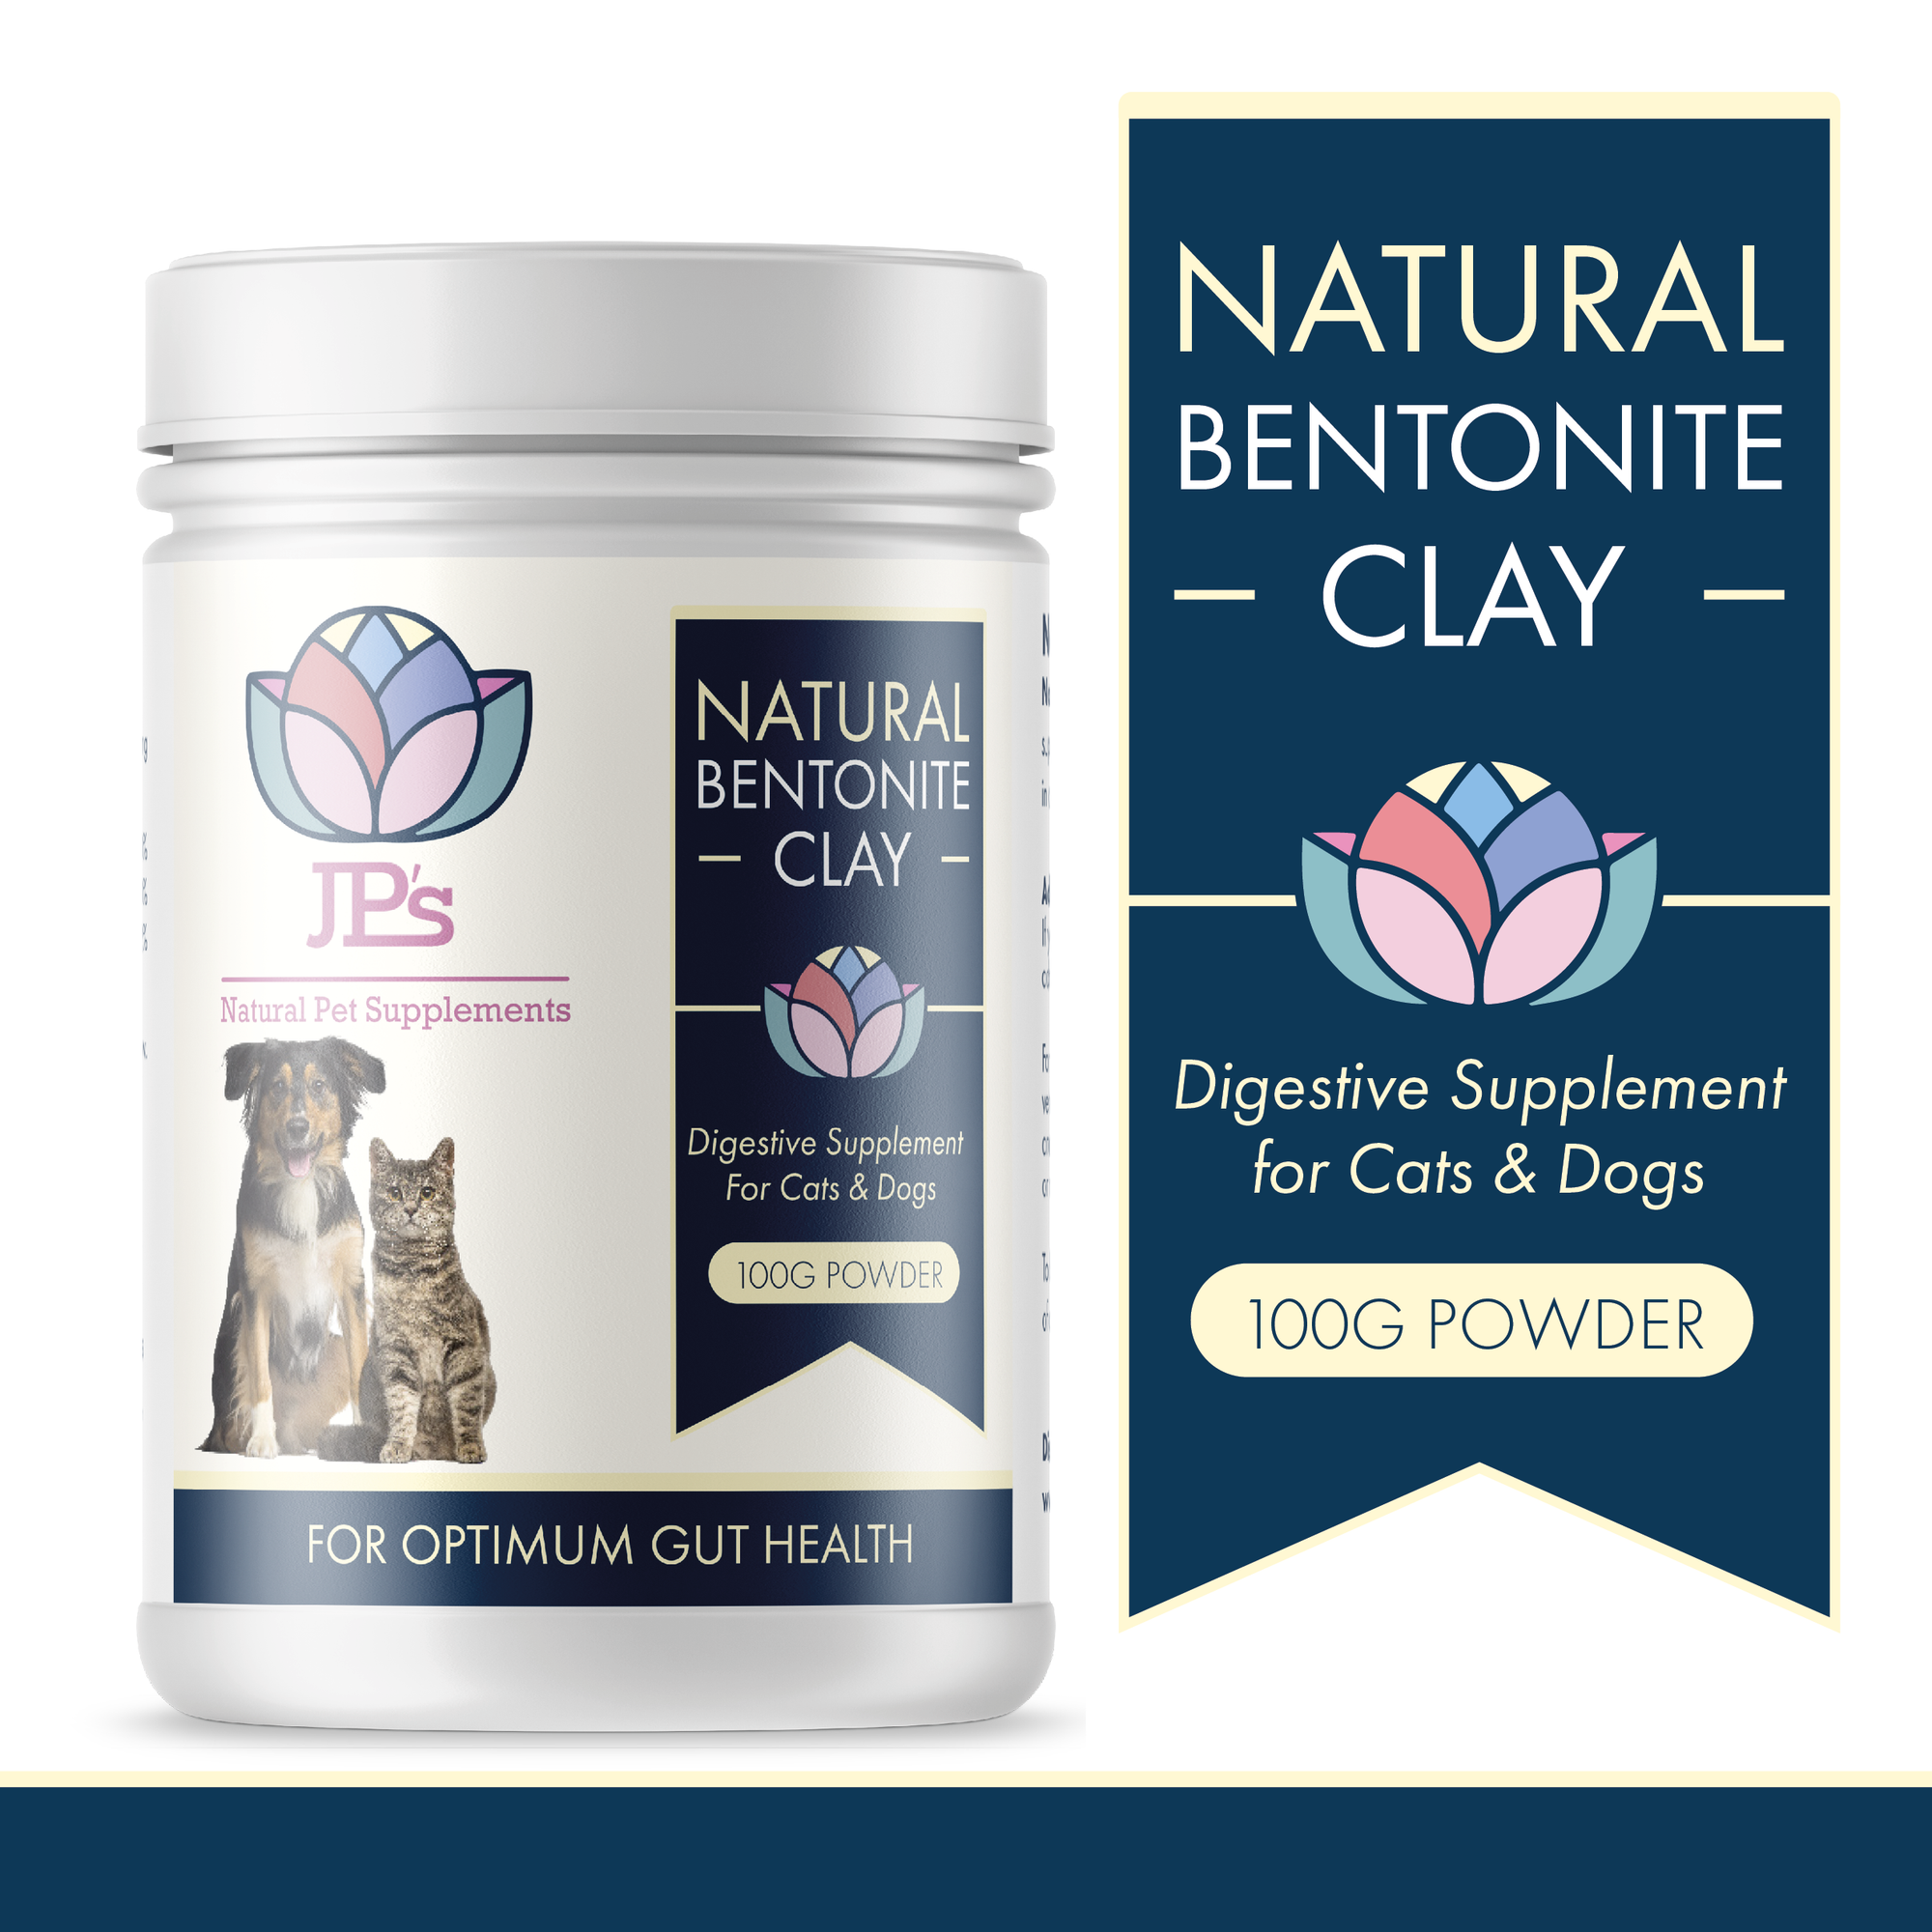 Natural Digestive Bentonite Clay for Dogs & Cats